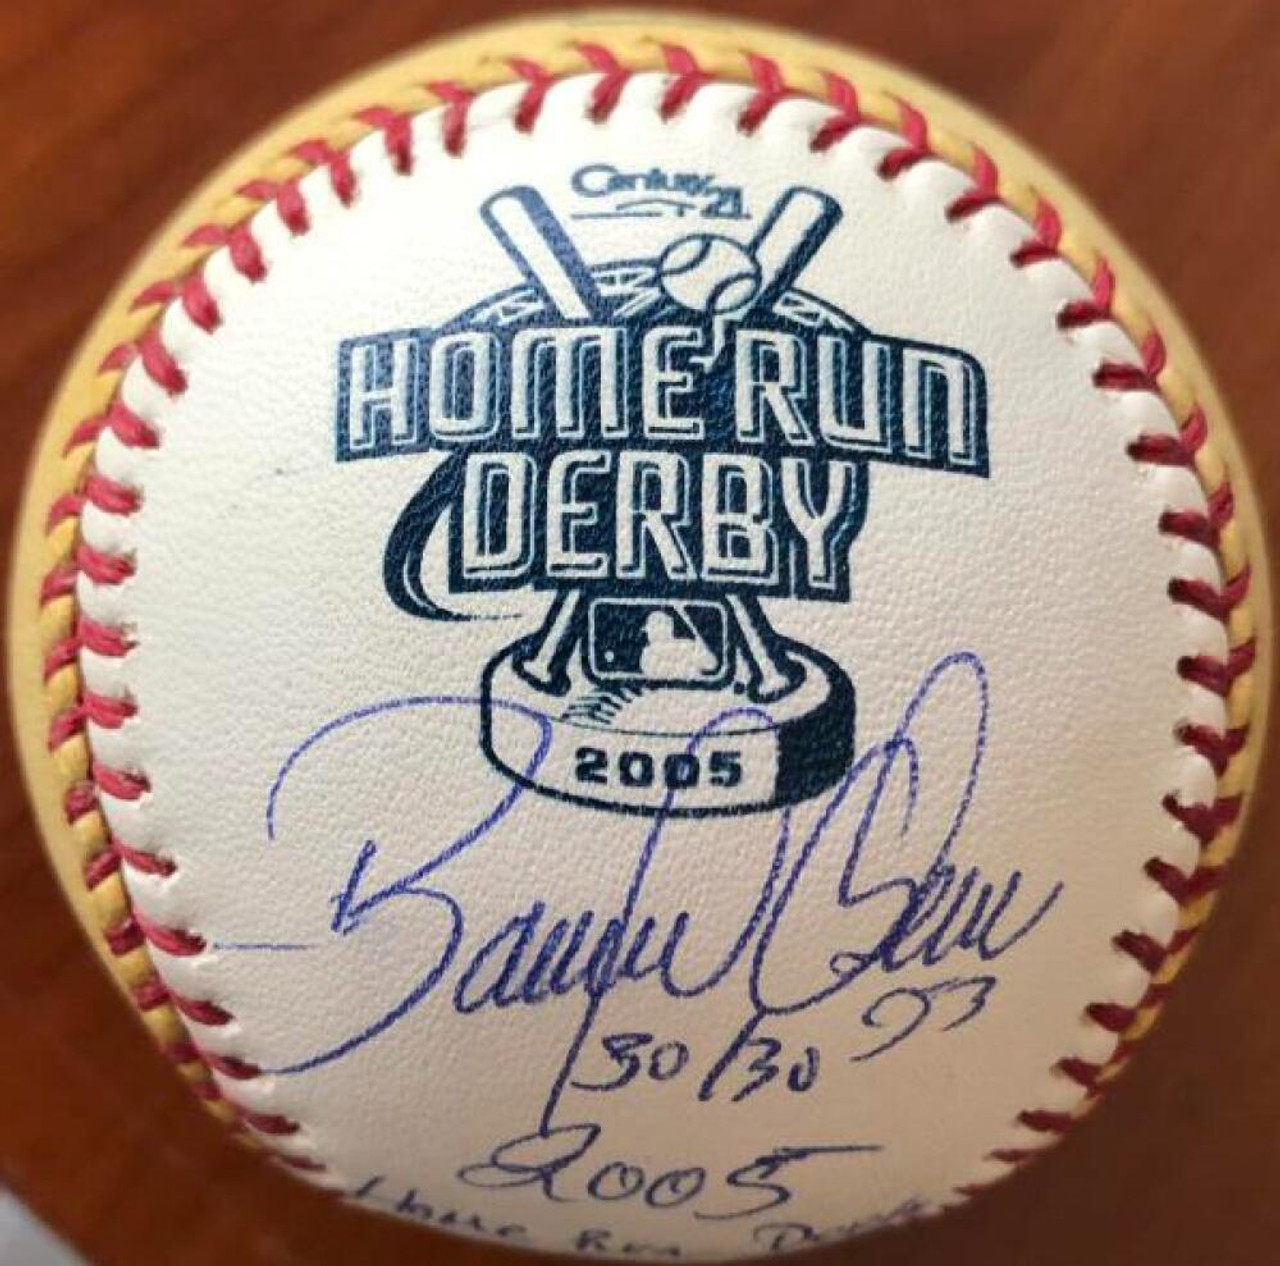 SOLD 118494 Bobby Abreu Autographed 2005 Home Run Derby Gold Ball